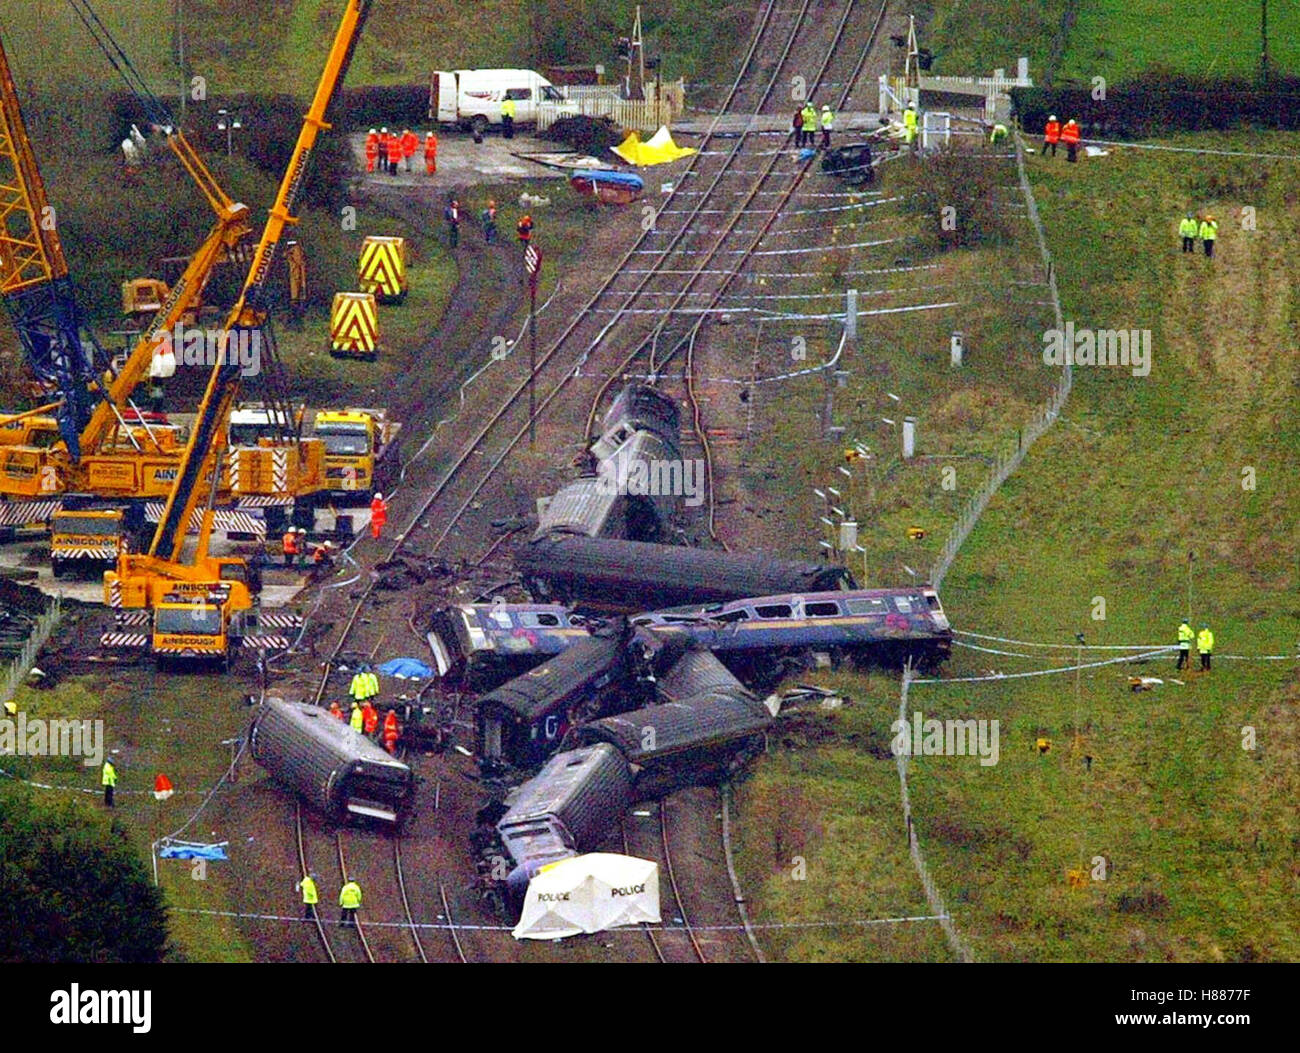 File photo dated 08/11/04 of a train crash in Ufton Nervet, Berkshire, which killed seven people and injured 120. Stock Photo